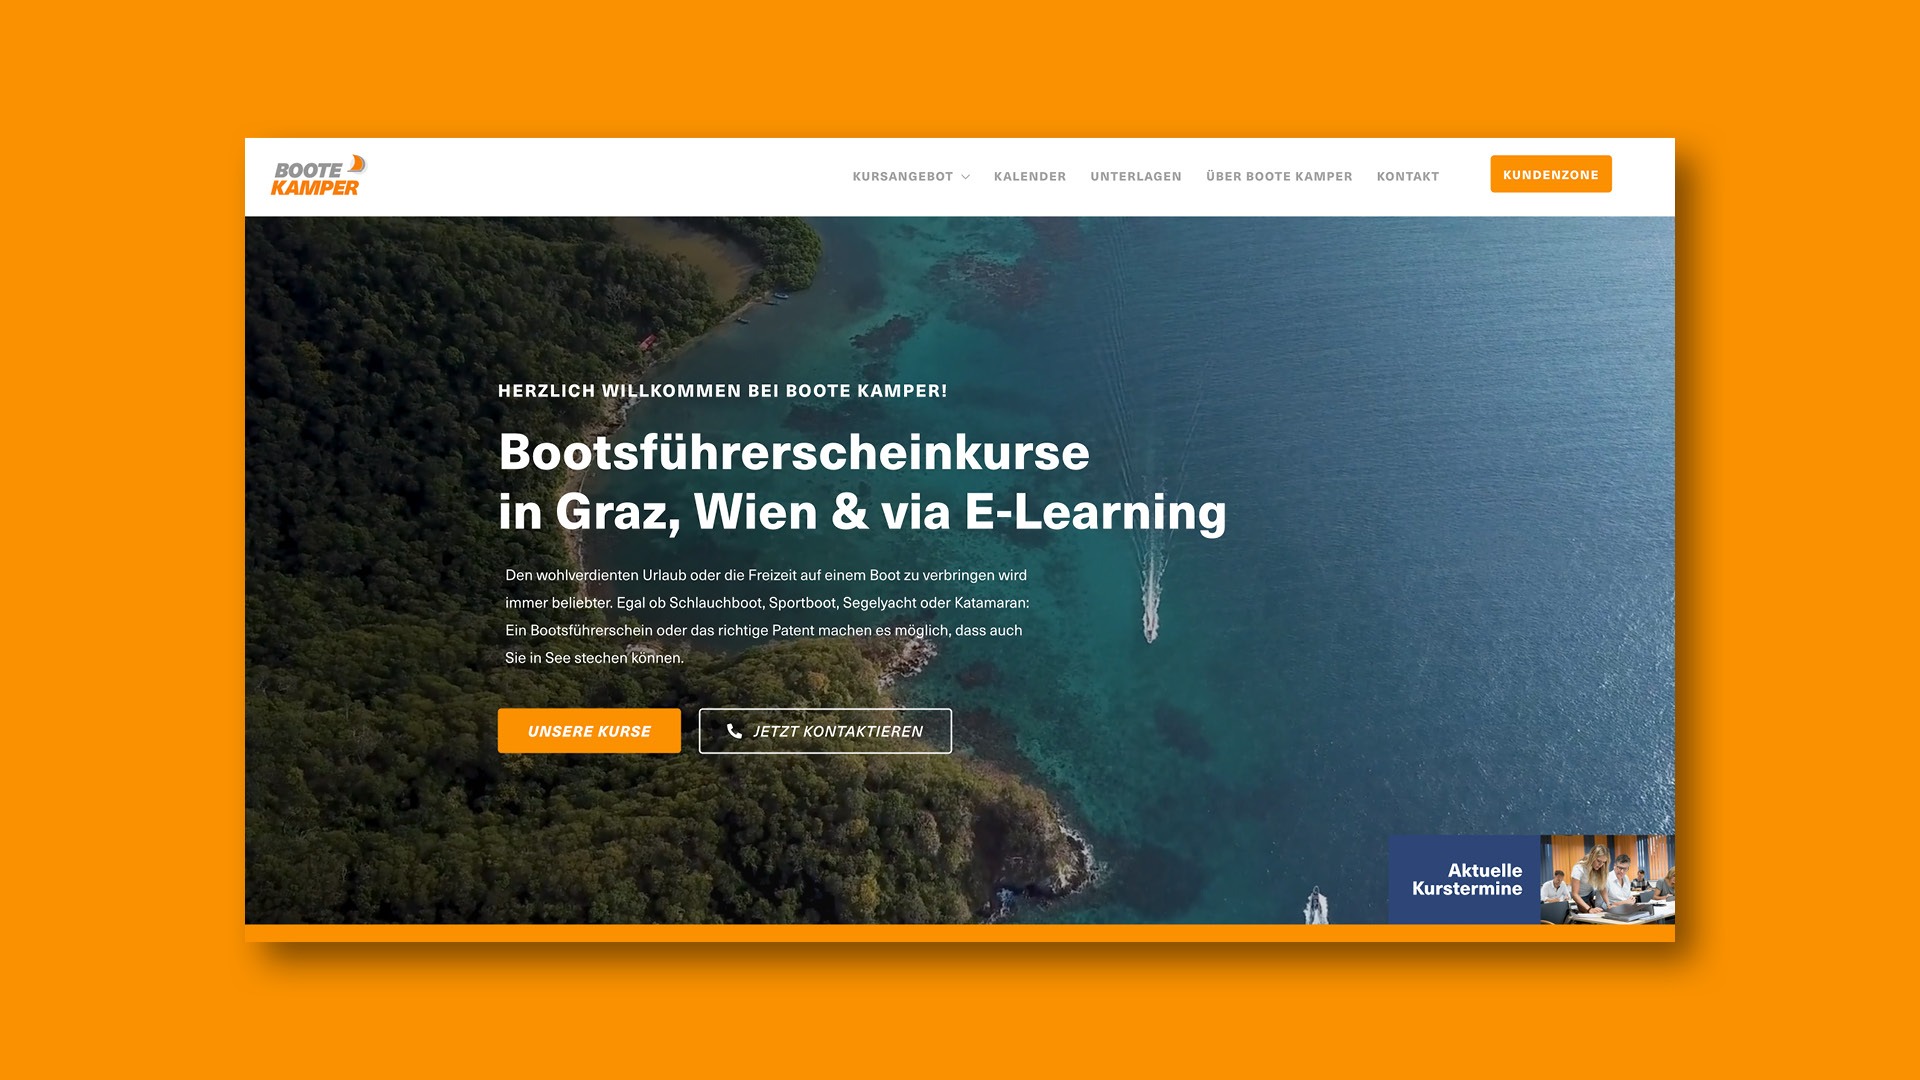 The homepage of Boote Kamper, a wine and wine learning company.